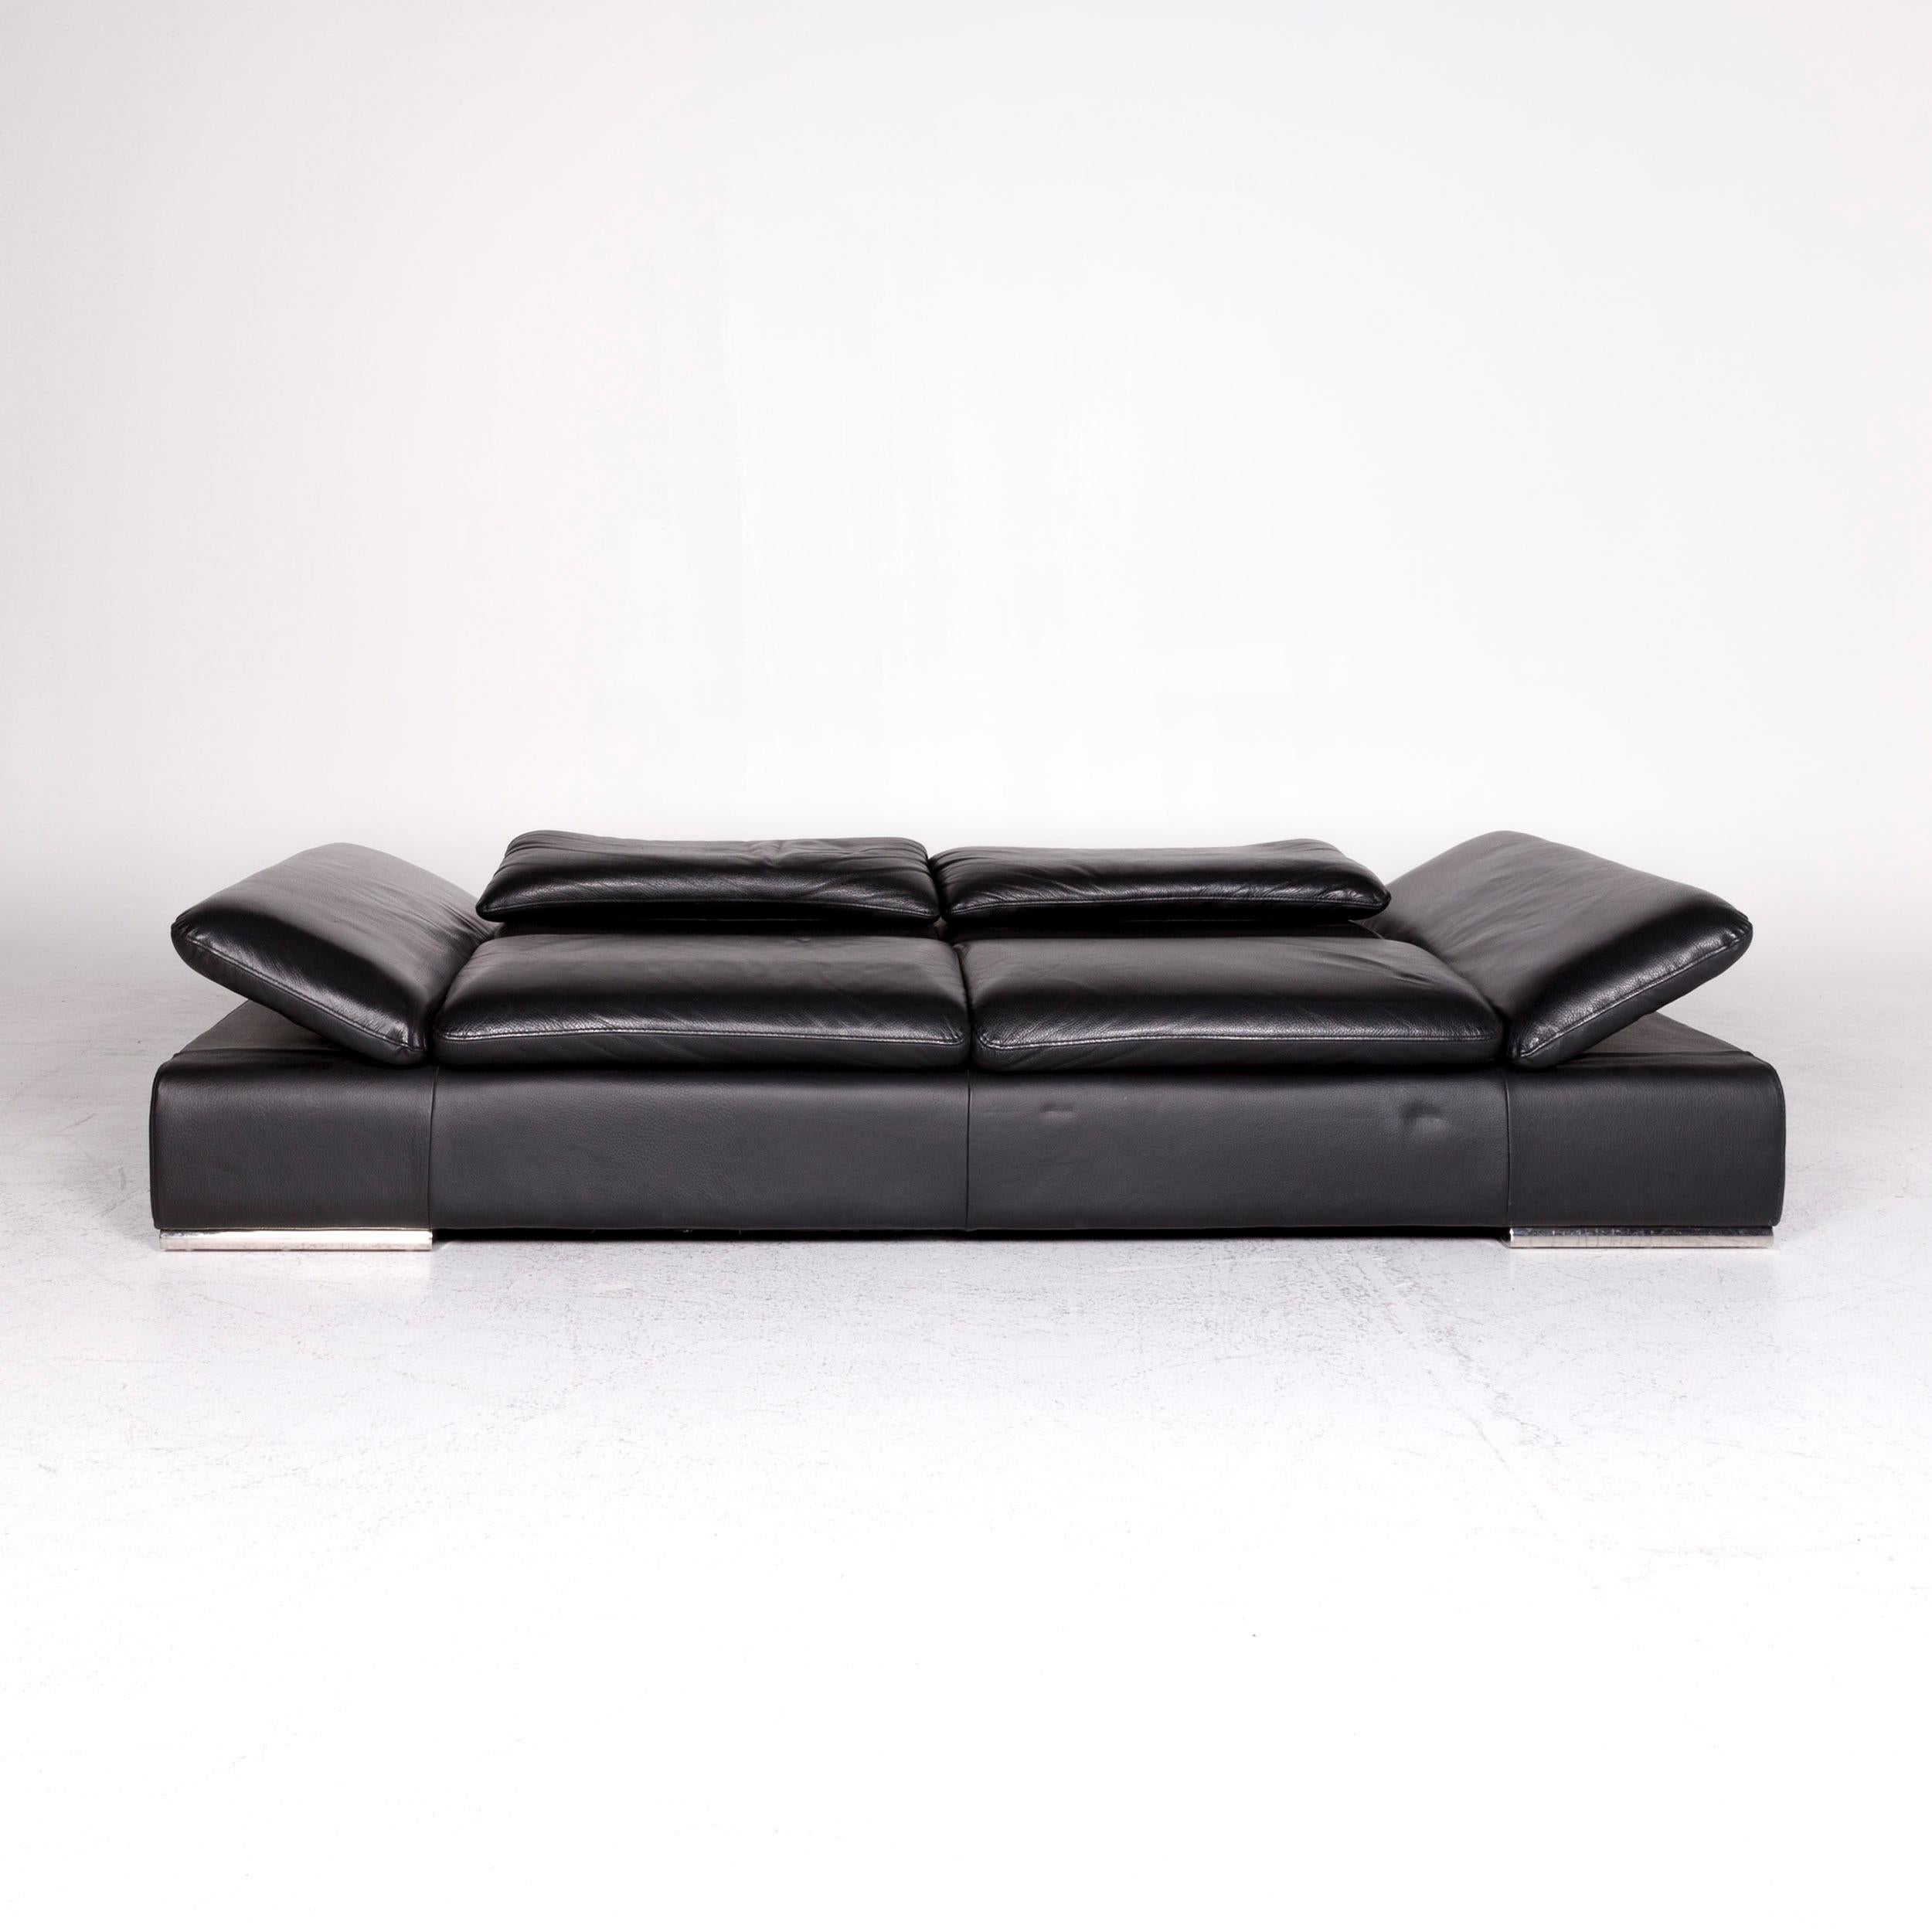 German Koinor Evento Designer Leather Sofa Black Two-Seat Couch